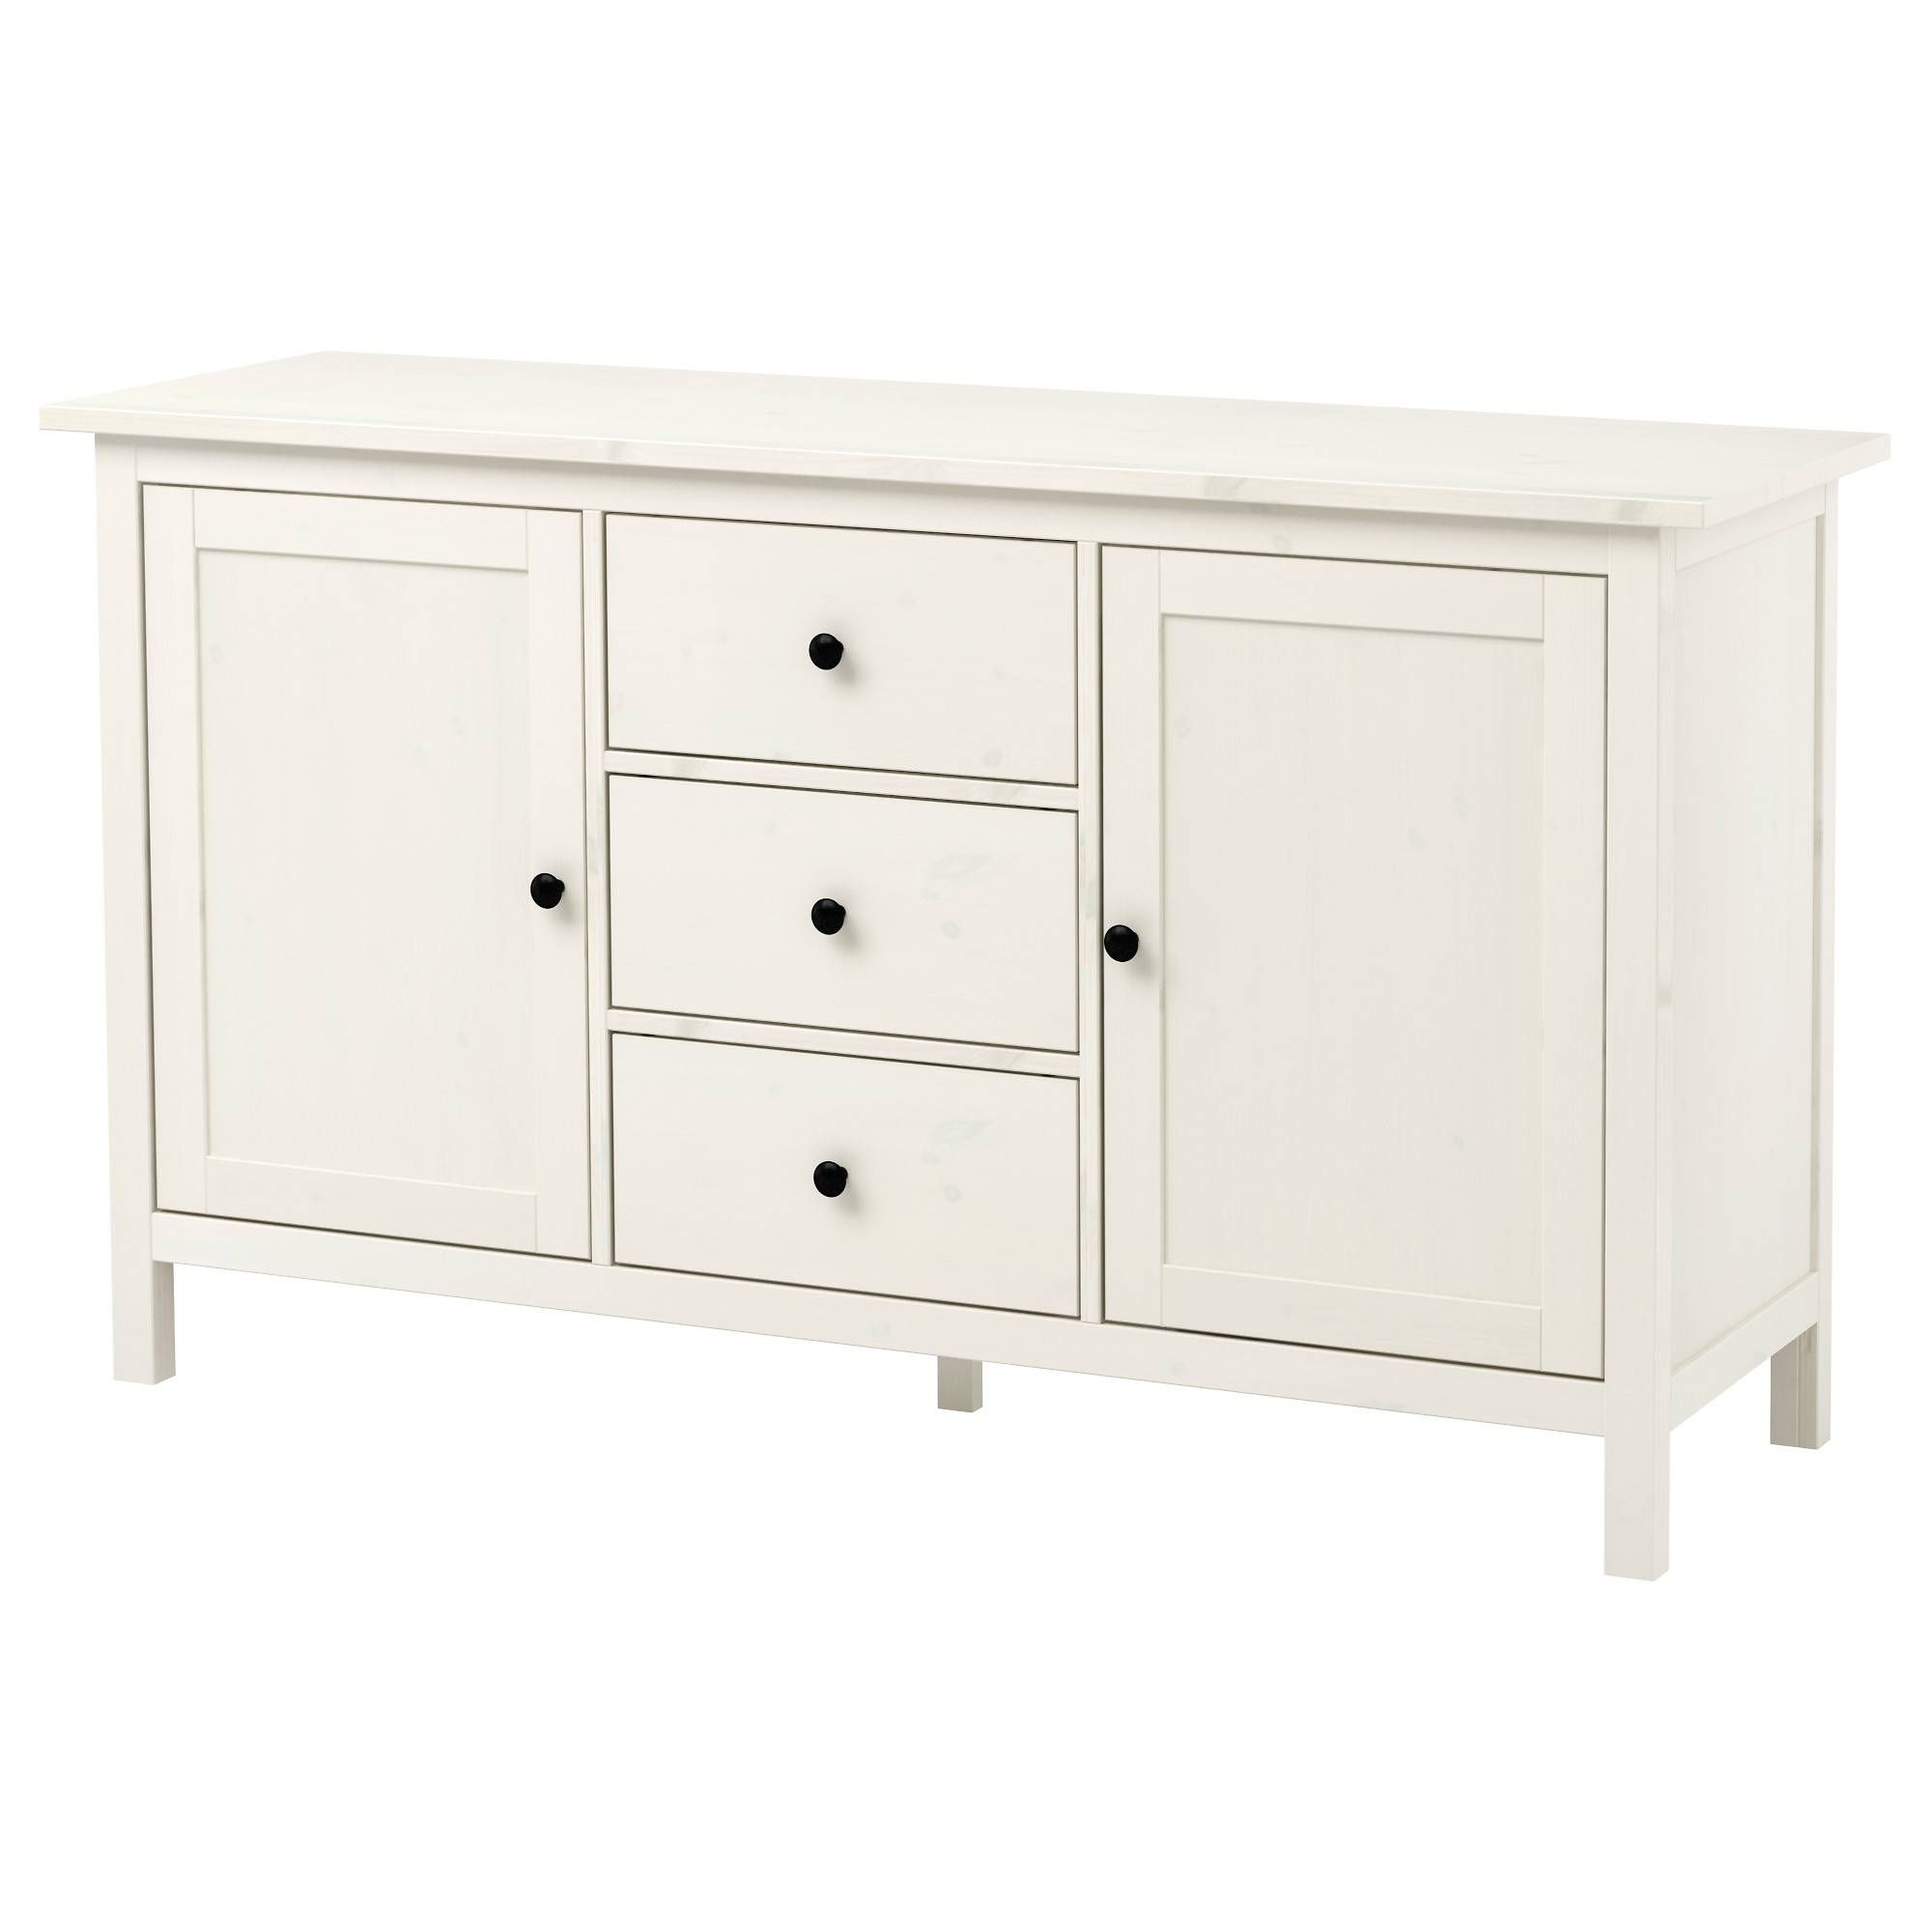 Hemnes Sideboard White Stain 157x88 Cm – Ikea For Ikea Sideboards (View 4 of 15)